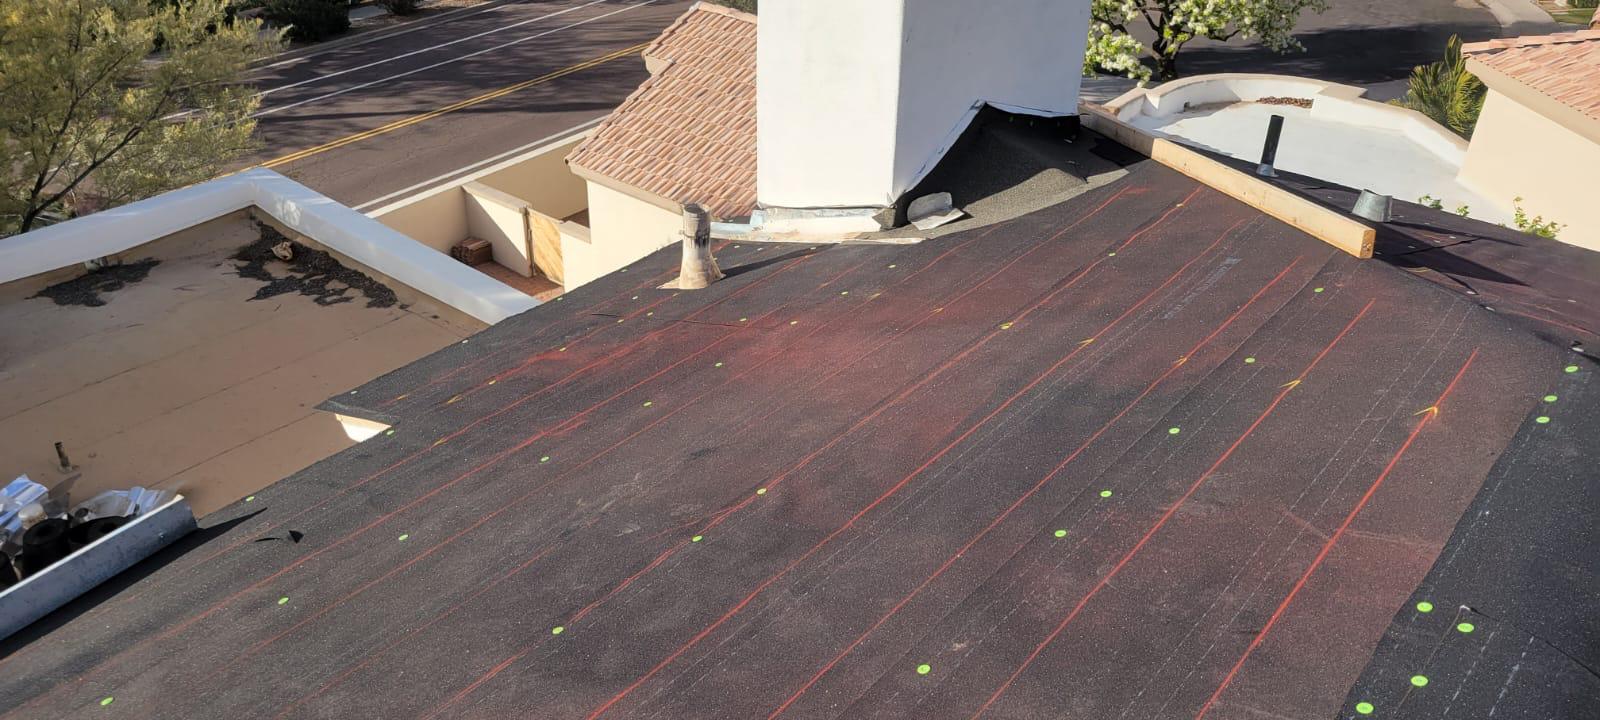 Tar paper laid out on a roof in preparation for tile re-felting, part of Behmer Roofing's quality services in Tempe.